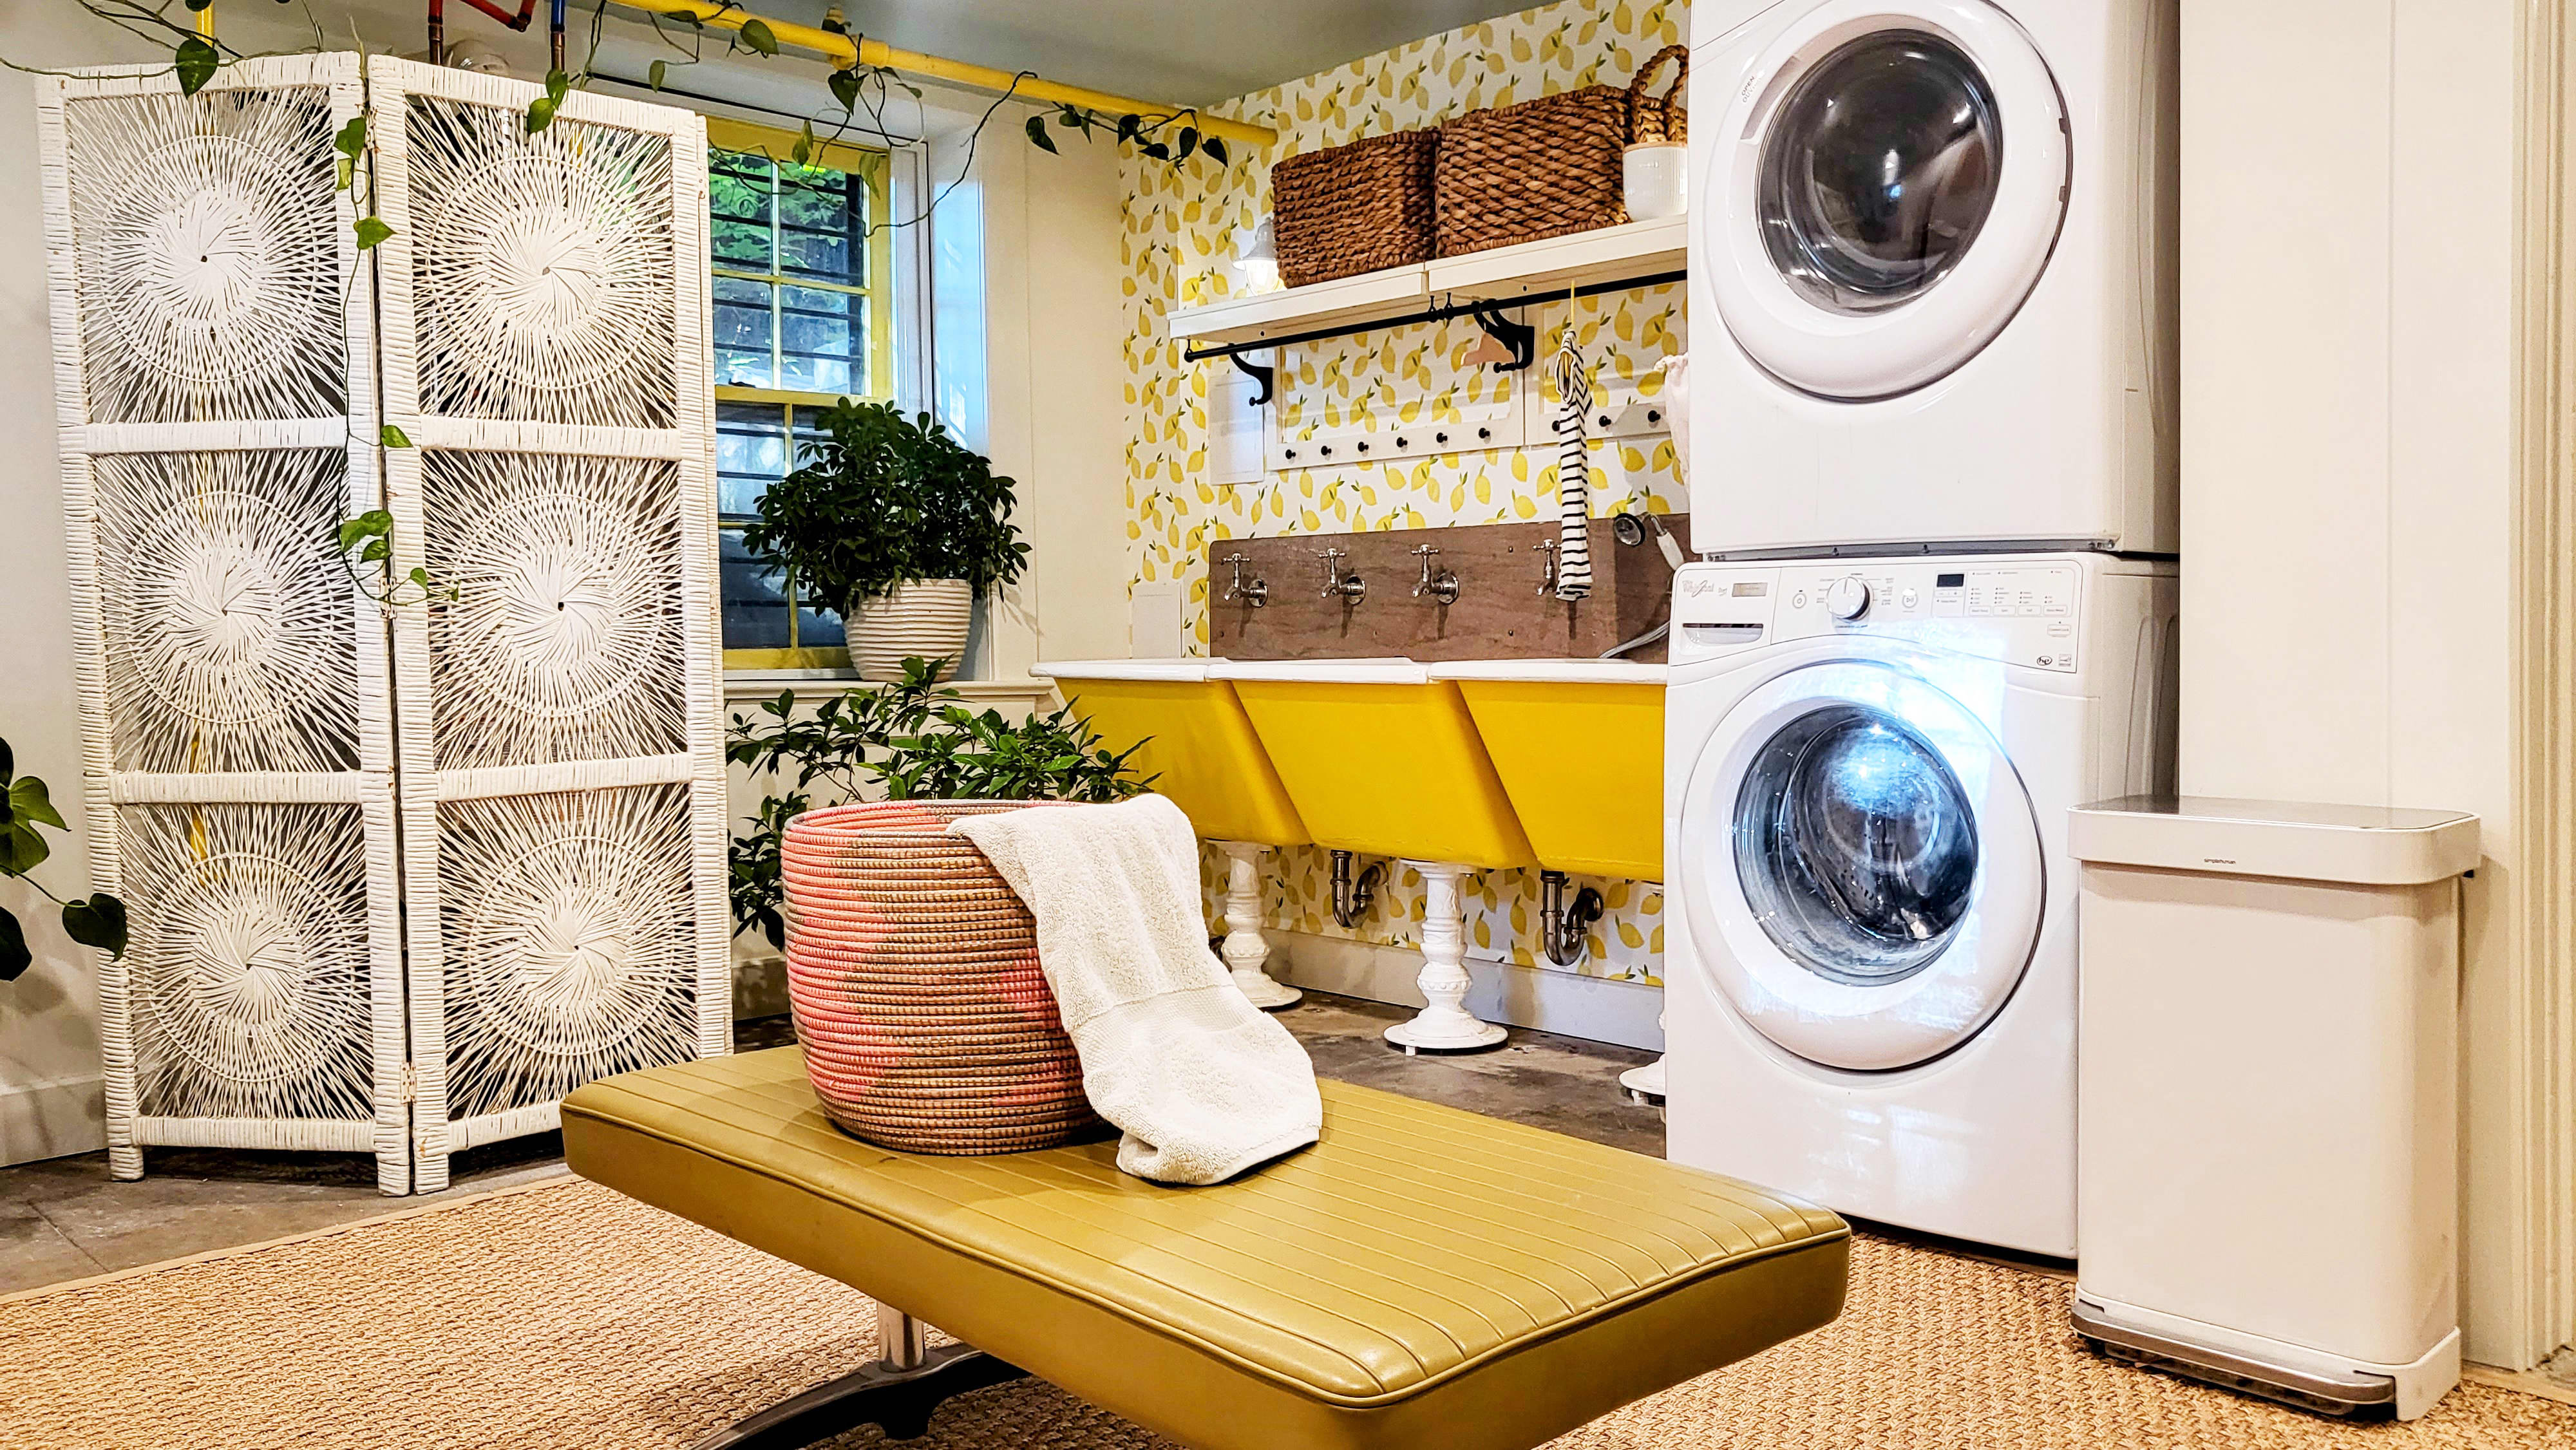 Laundry Room Makeover: My 7 Wildest Laundry Fantasies Come to Life